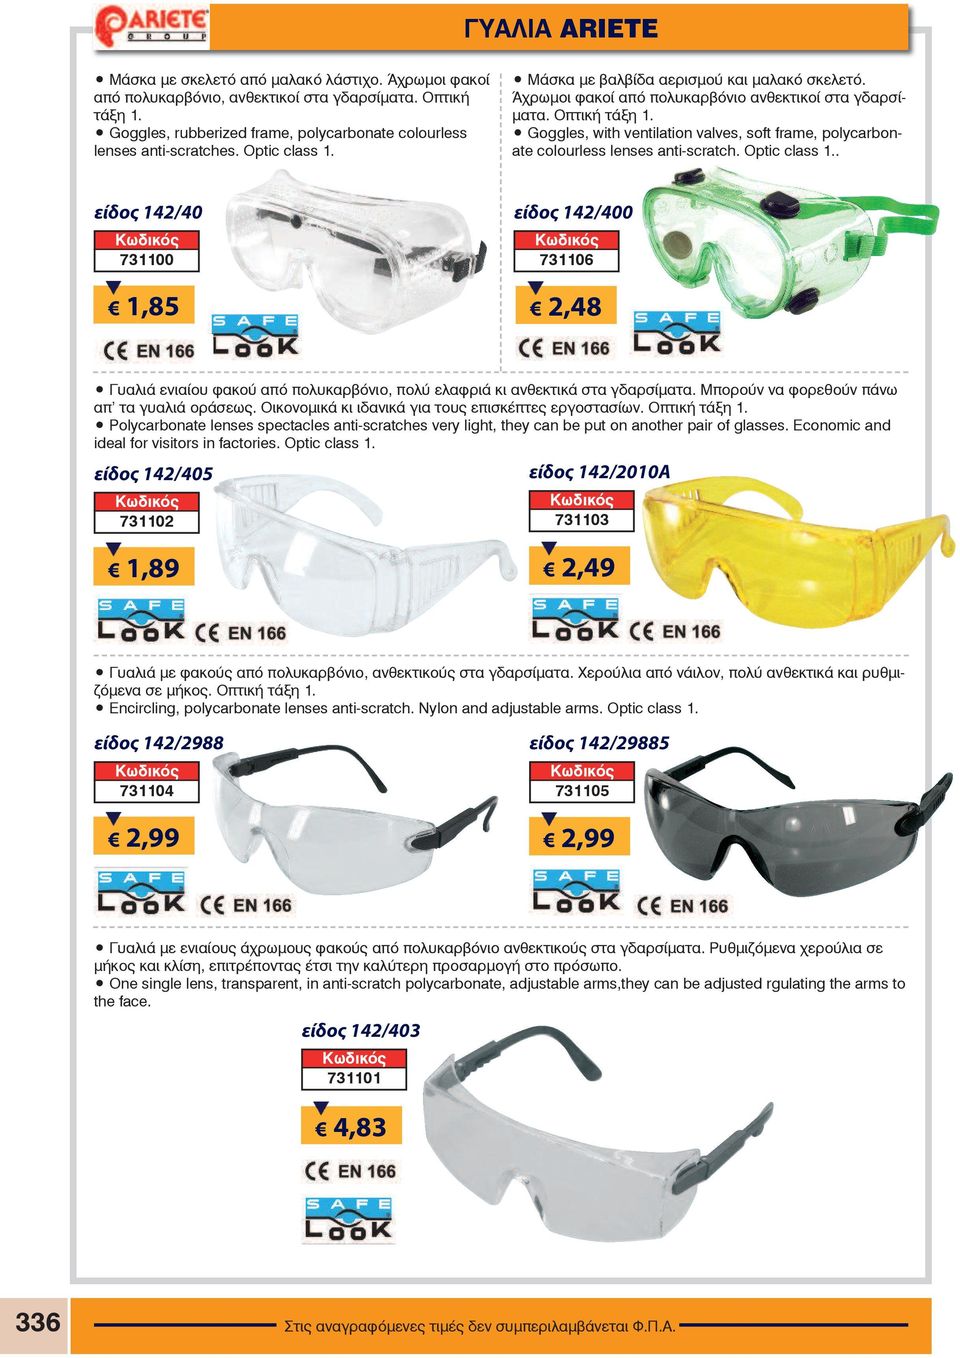 Goggles, with ventilation valves, soft frame, polycarbonate colourless lenses anti-scratch. Optic class 1.